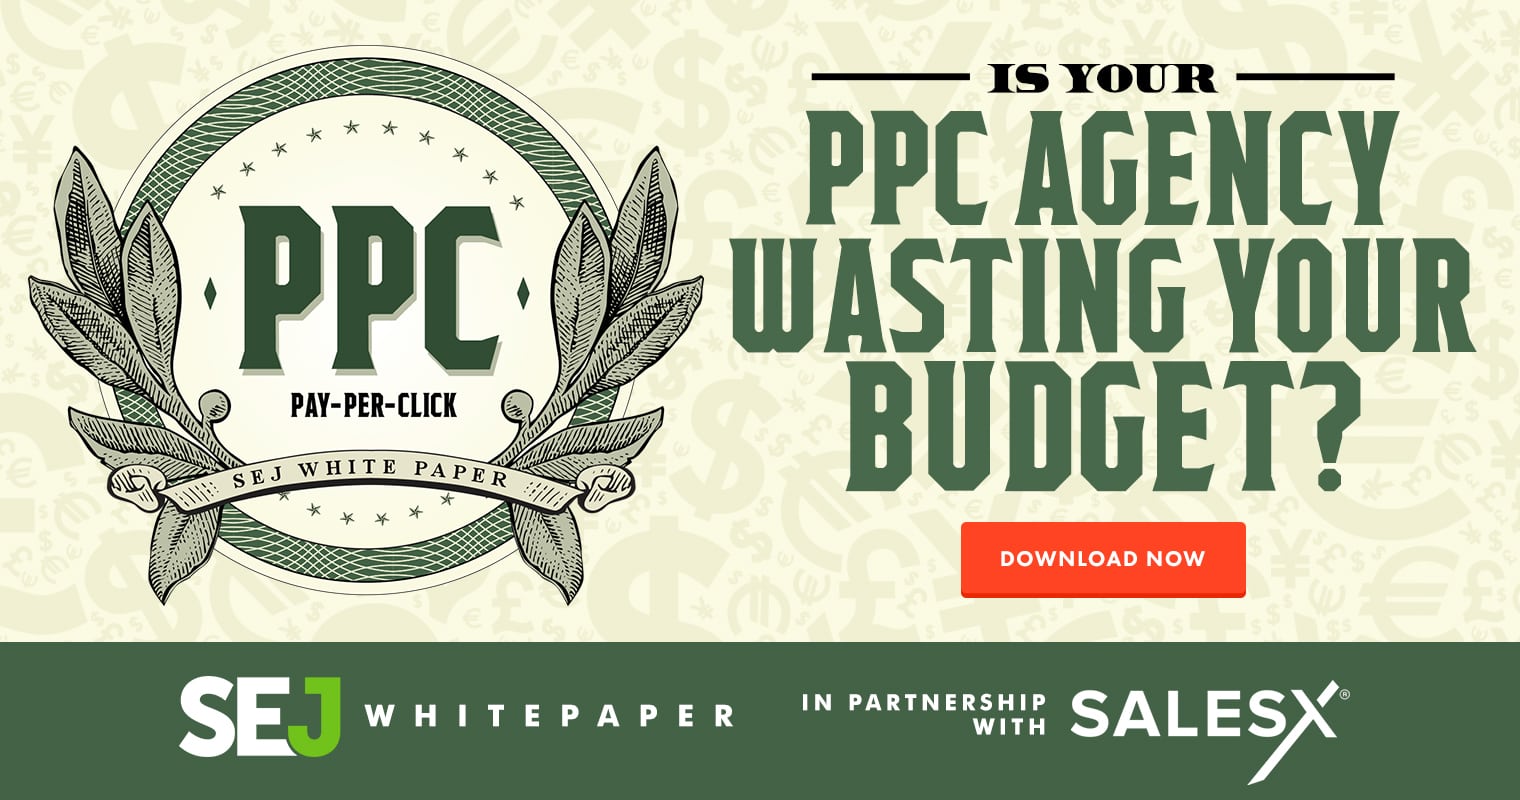 Is Your PPC Agency Wasting Your Budget? [NEW]